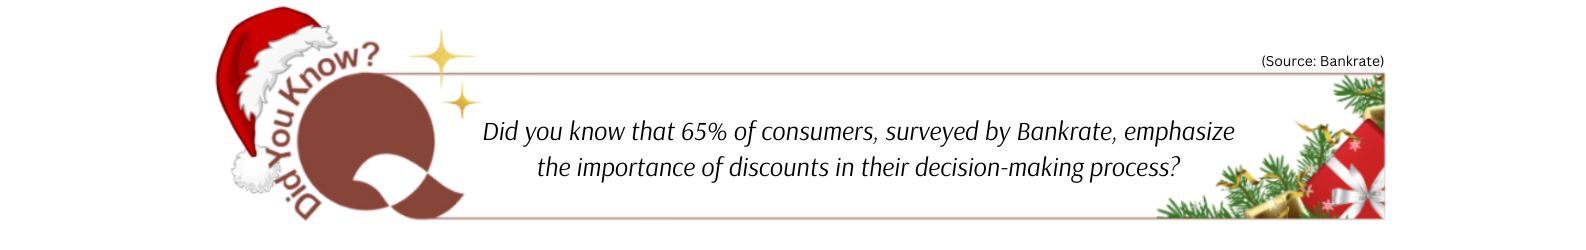 Did you know: 65% of consumers, surveyed by Bankrate, emphasize the importance of discounts in their decision-making process